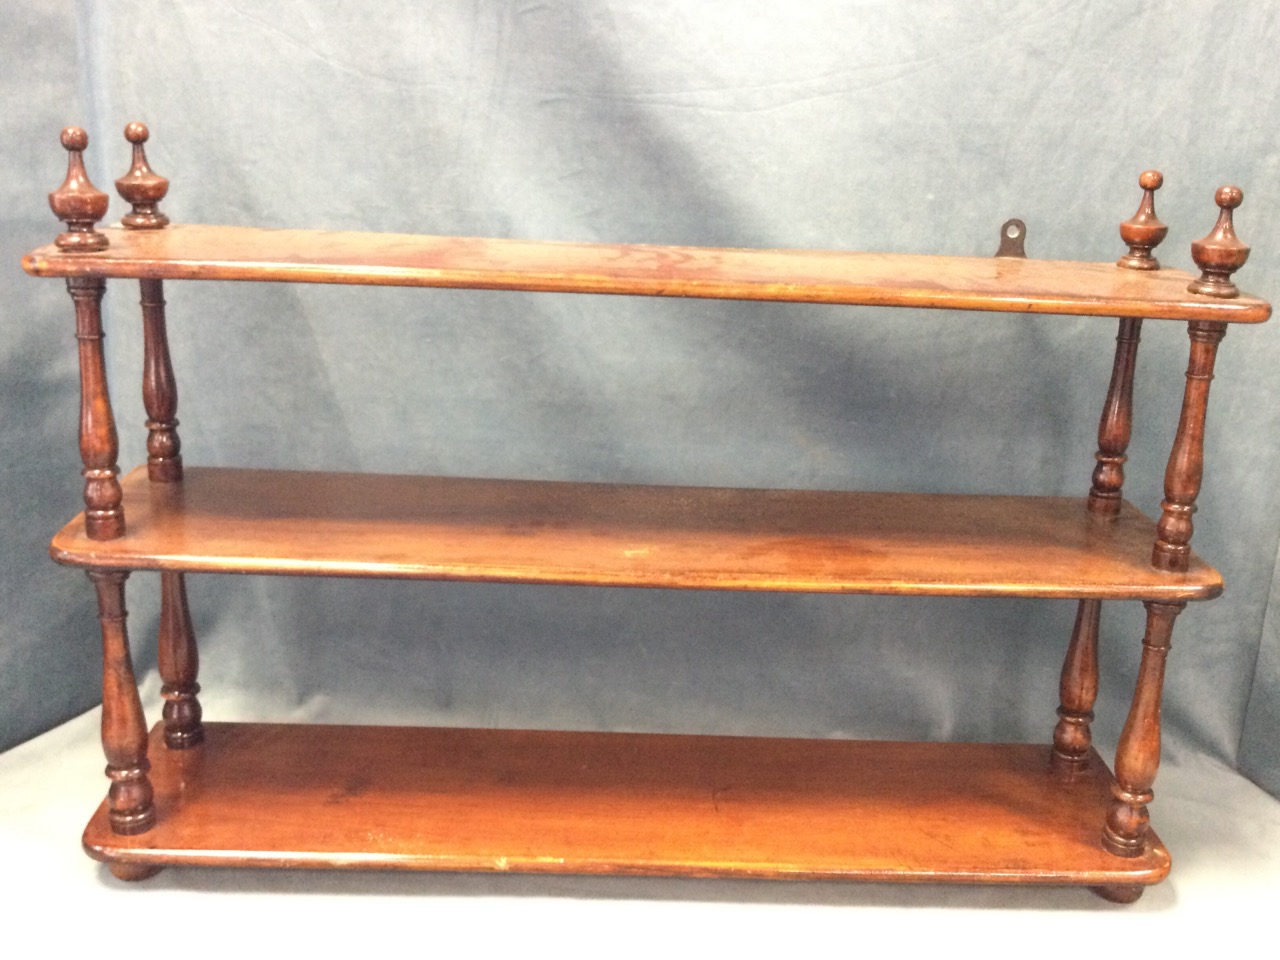 A set of nineteenth century stained wall shelves with three rounded platforms supported by turned